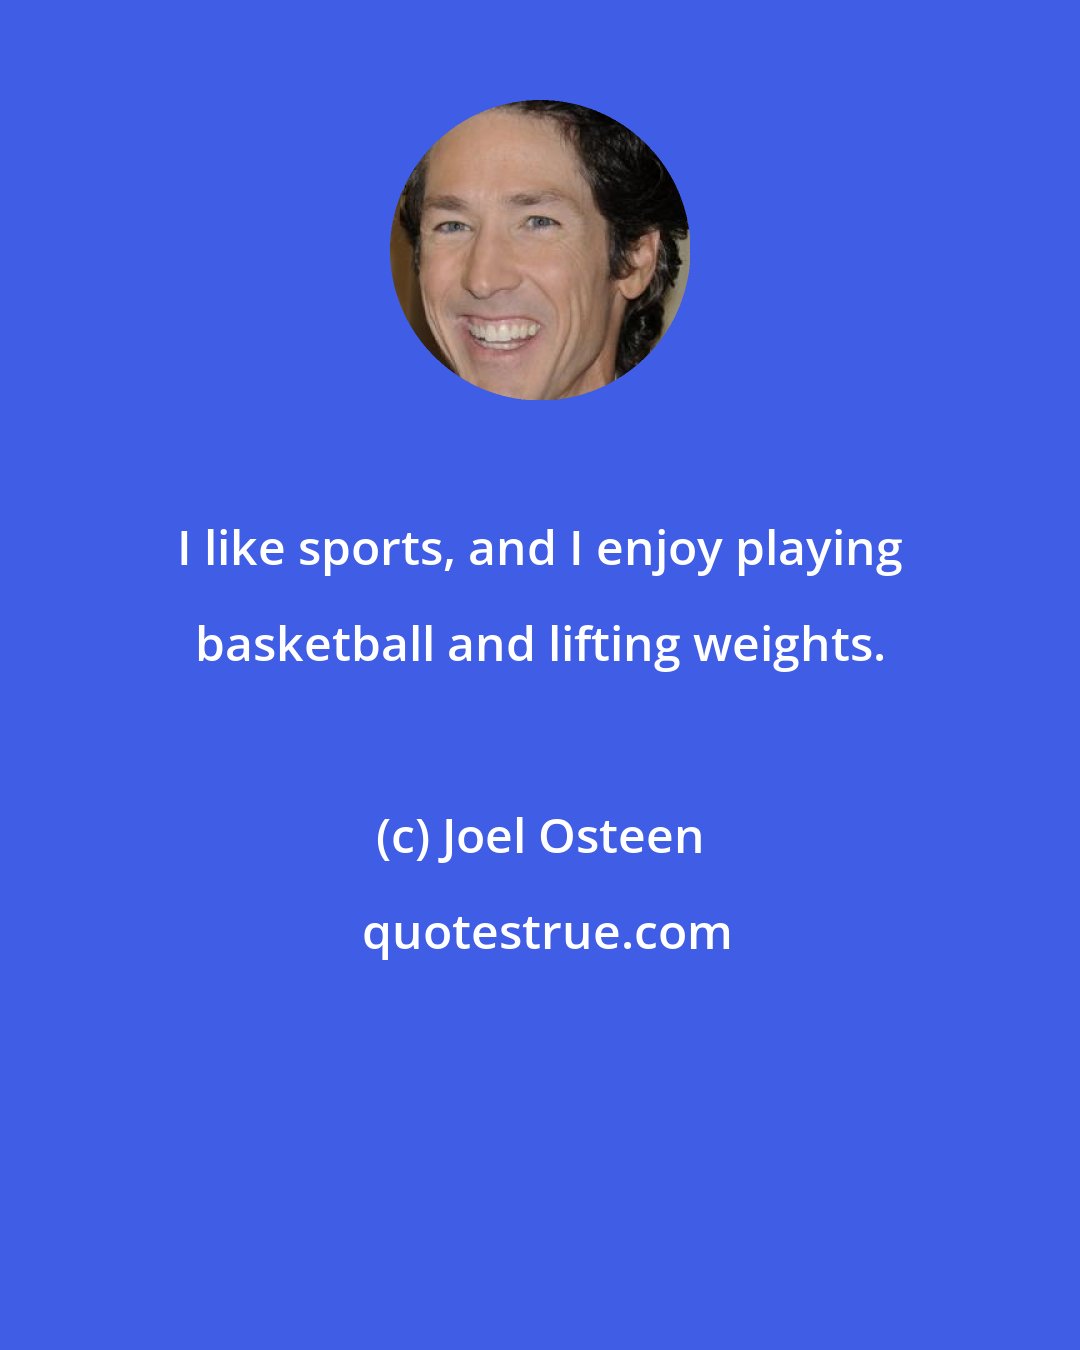 Joel Osteen: I like sports, and I enjoy playing basketball and lifting weights.